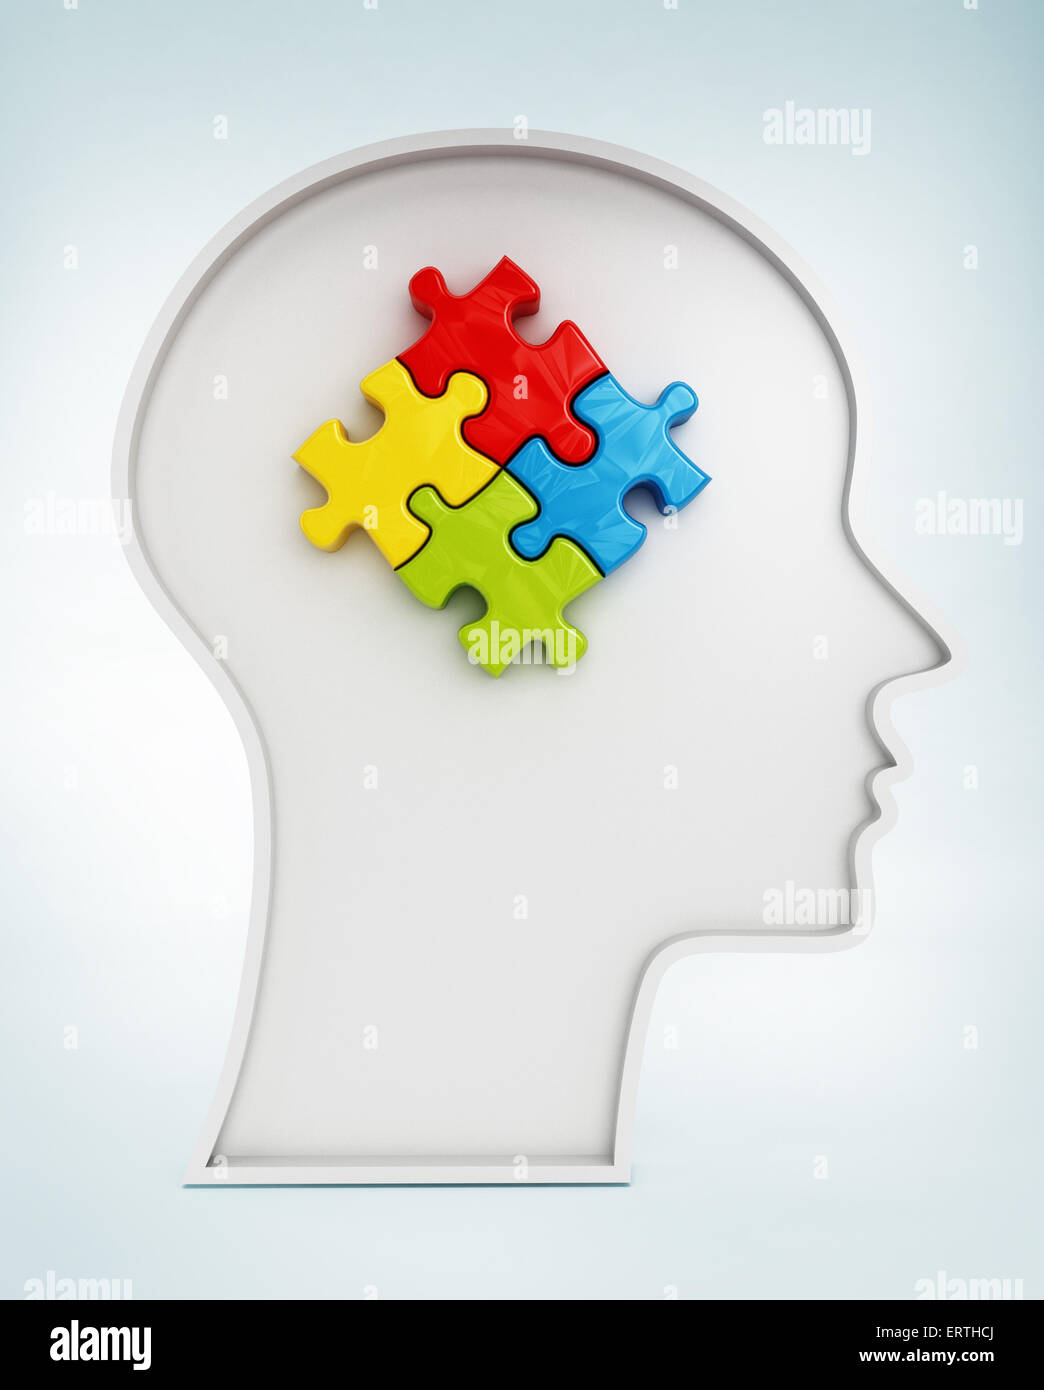 Four colored jigsaw puzzle pieces inside human head shape Stock Photo